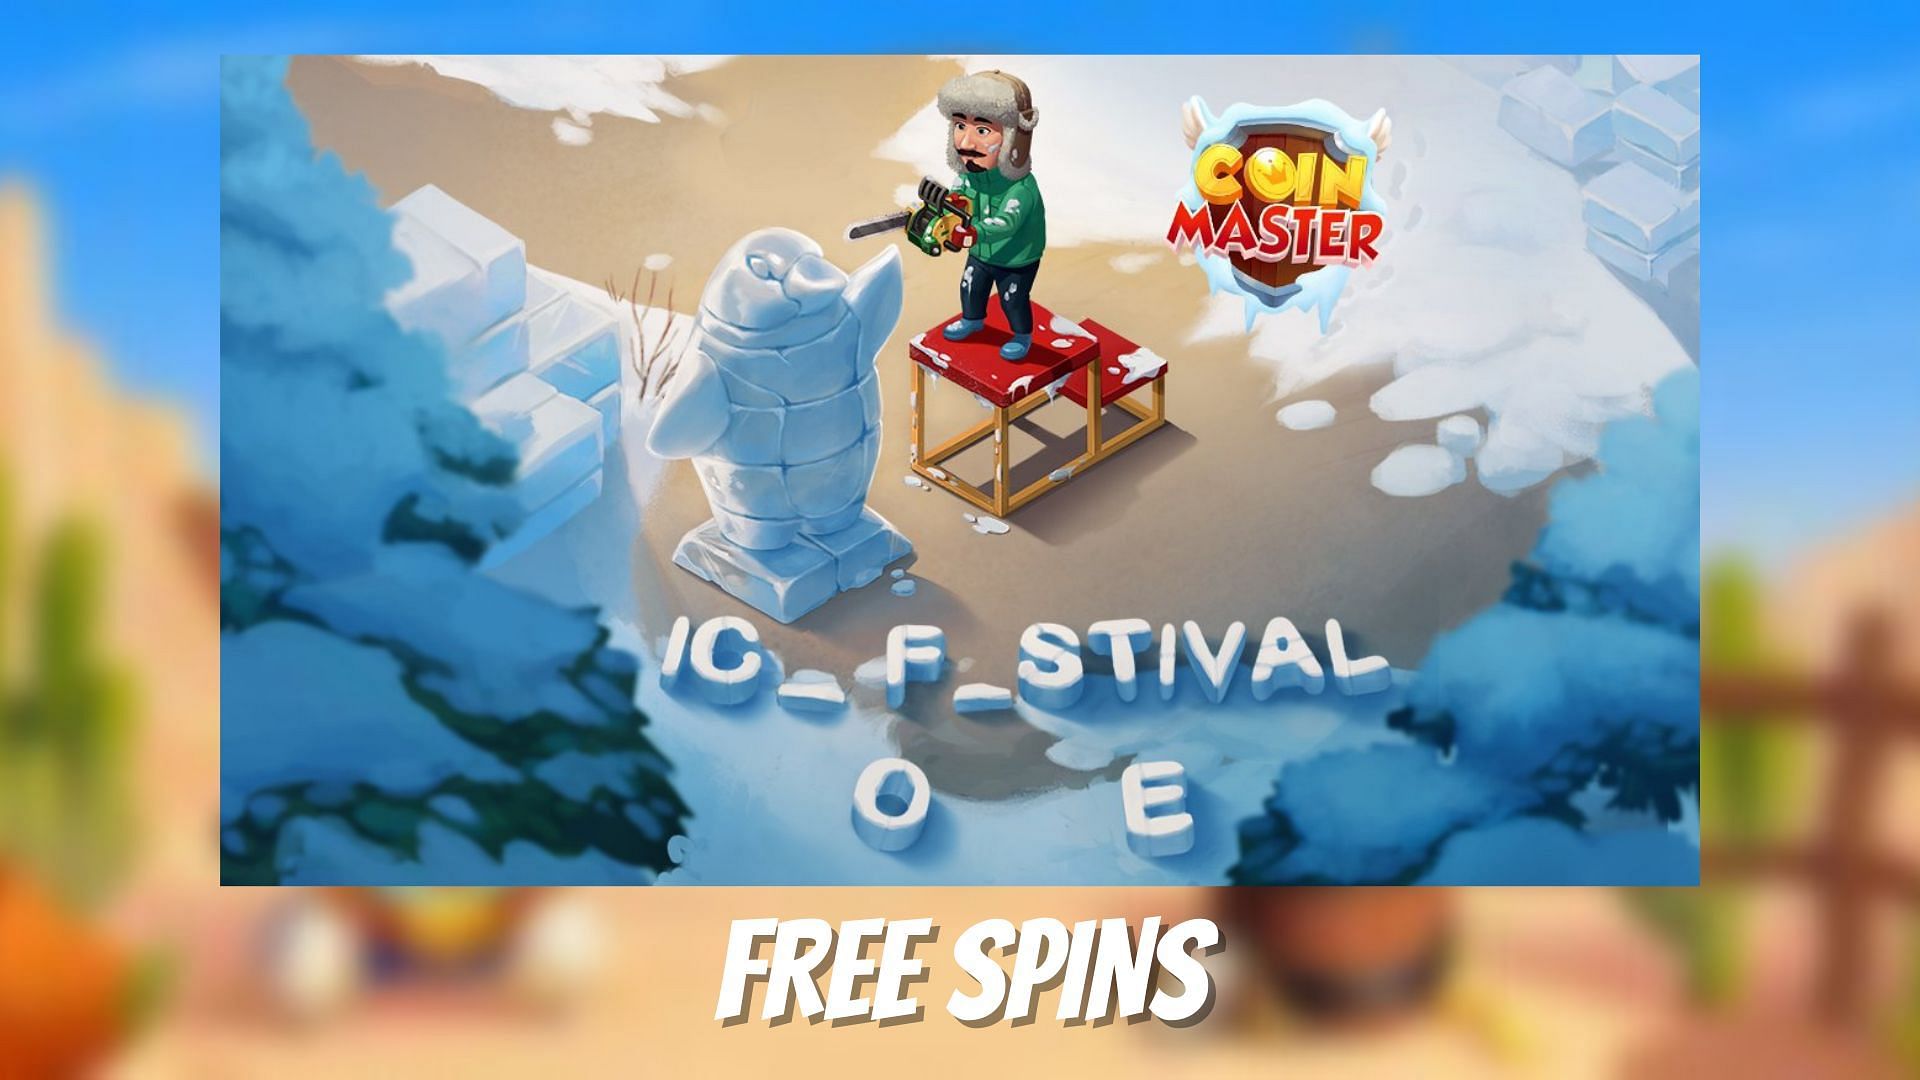 Reward links grant free spins or gold or a combination of the two. (Image via Sportskeeda)